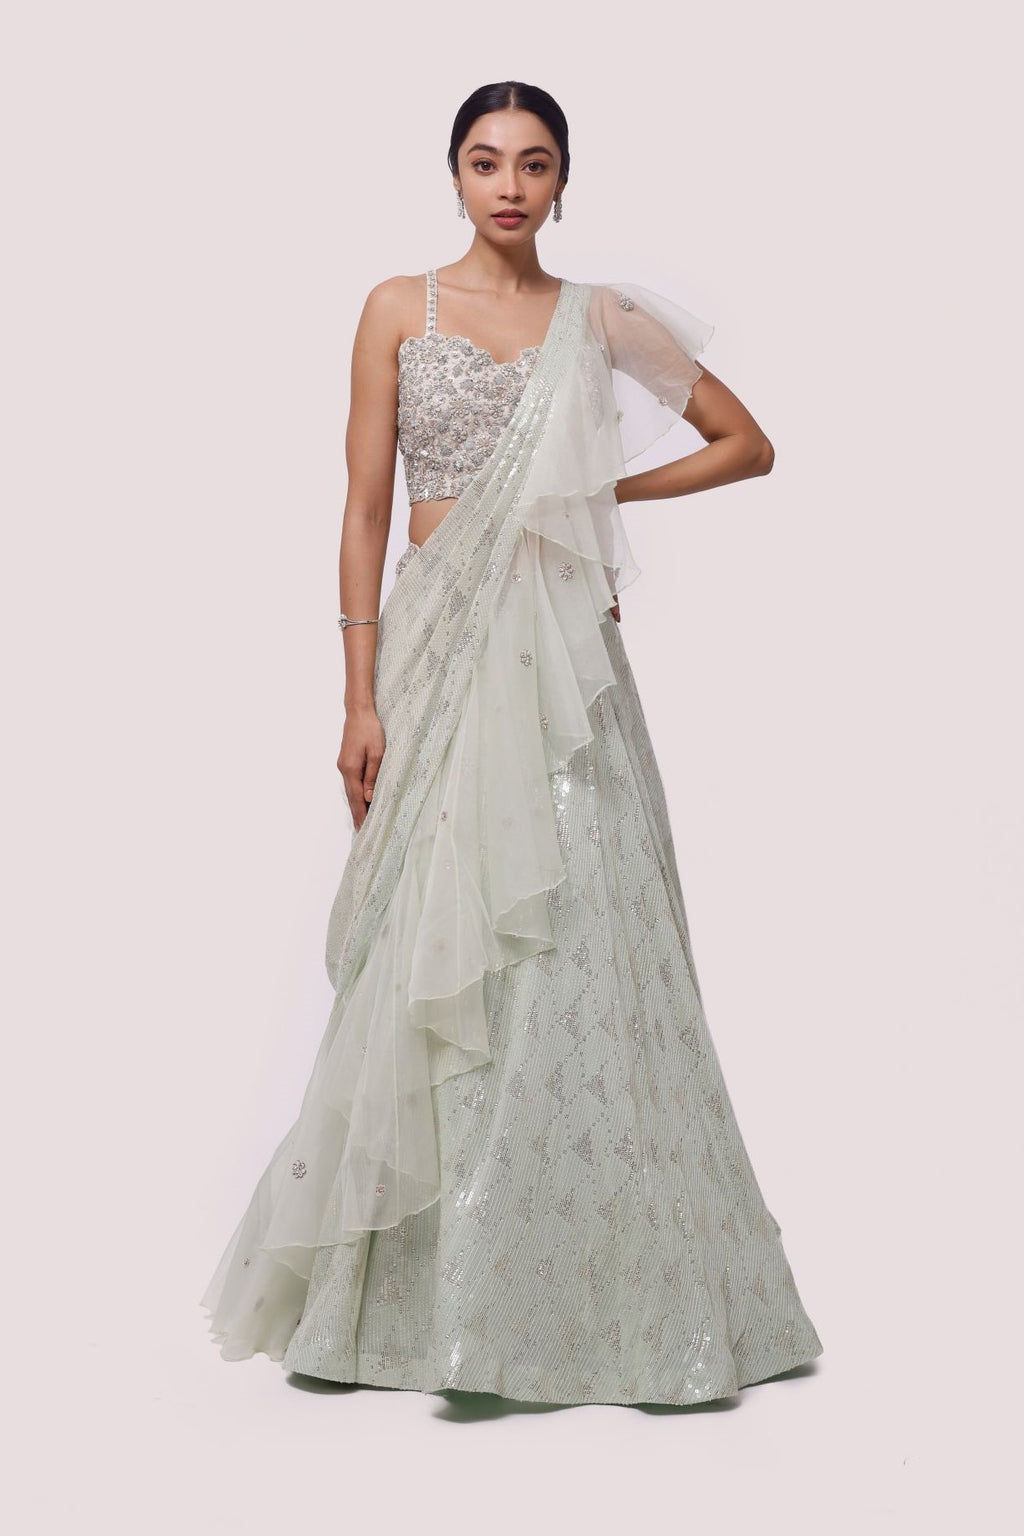 Shop the look your best on wedding occasions in this green lehenga with elaborate silver cut dana, sequence work, and a ruffle beautiful dupatta. Dazzle on weddings and special occasions with exquisite Indian designer dresses, sharara suits, Anarkali suits, bridal lehengas, and sharara suits from Pure Elegance Indian clothing store in the USA. Shop online from Pure Elegance.